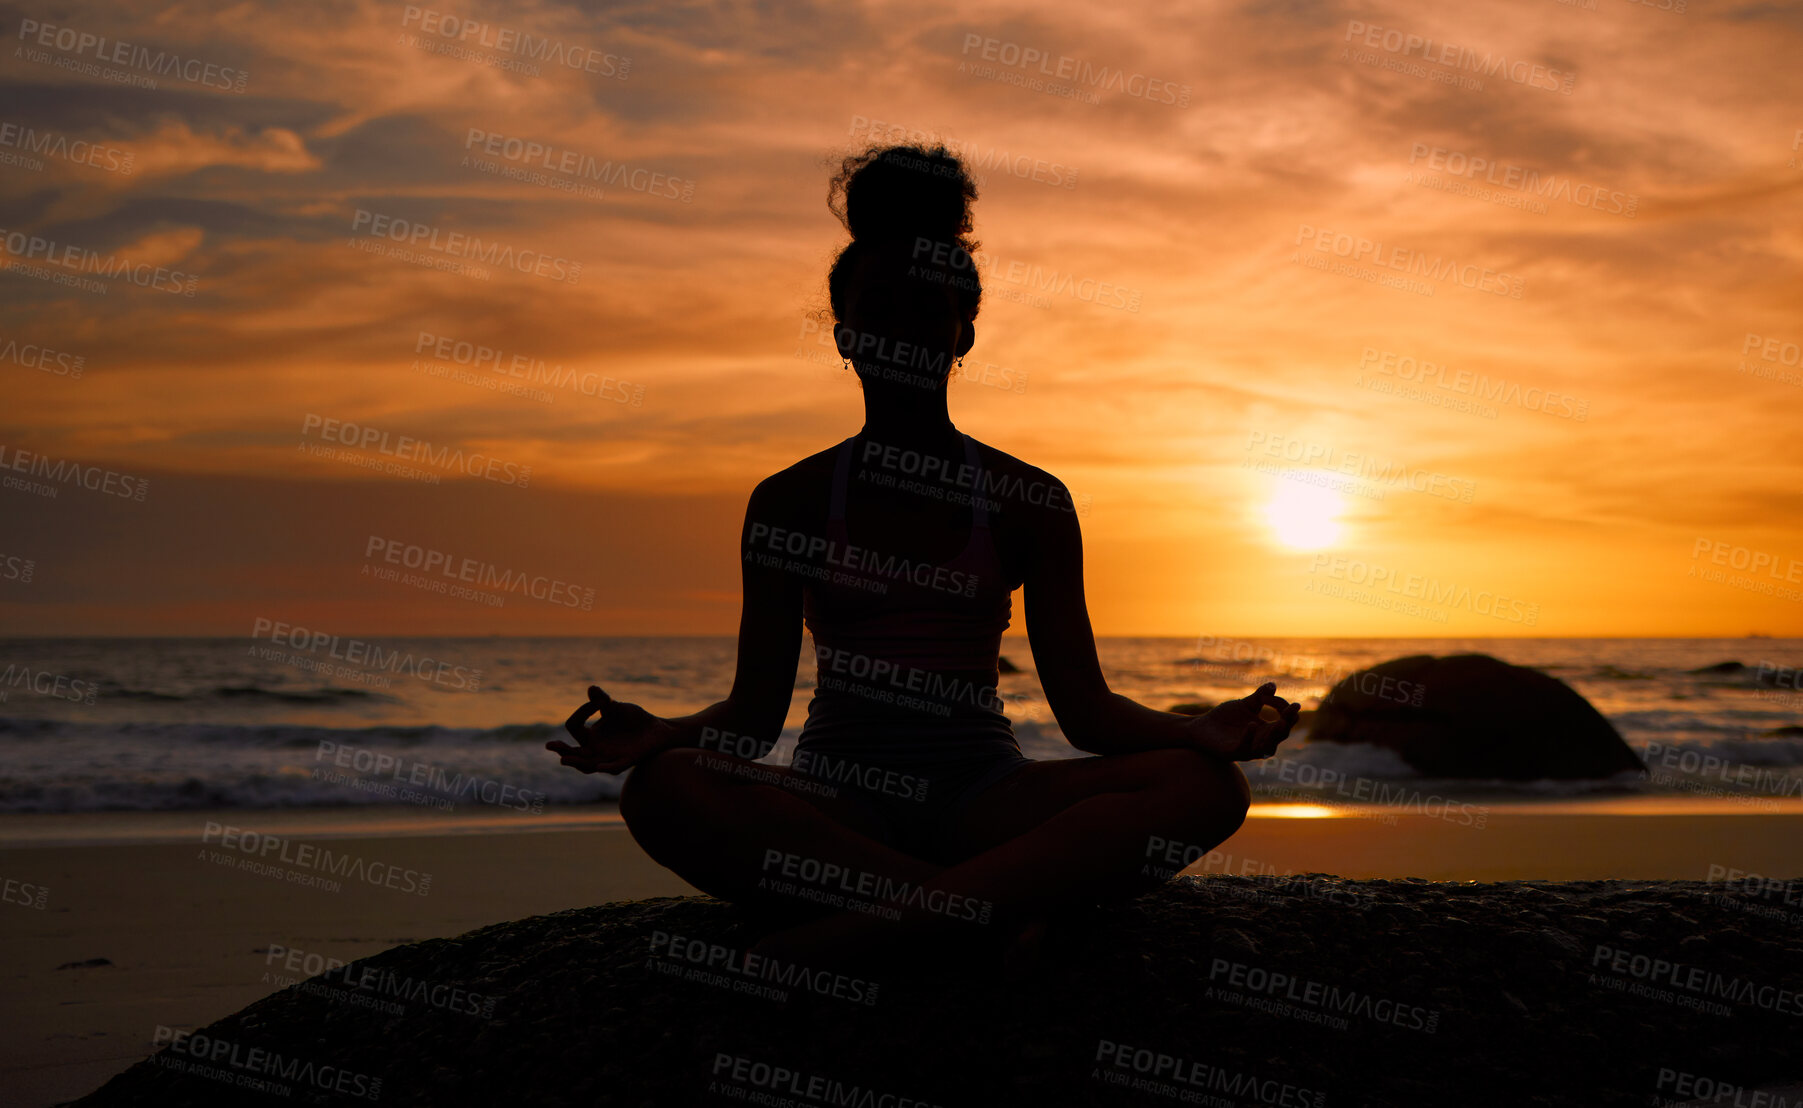 Buy stock photo Sunset, beach and silhouette of a woman in a lotus pose while doing a yoga exercise by the sea. Peace, zen and shadow of a calm female doing meditation or pilates workout outdoor at dusk by the ocean